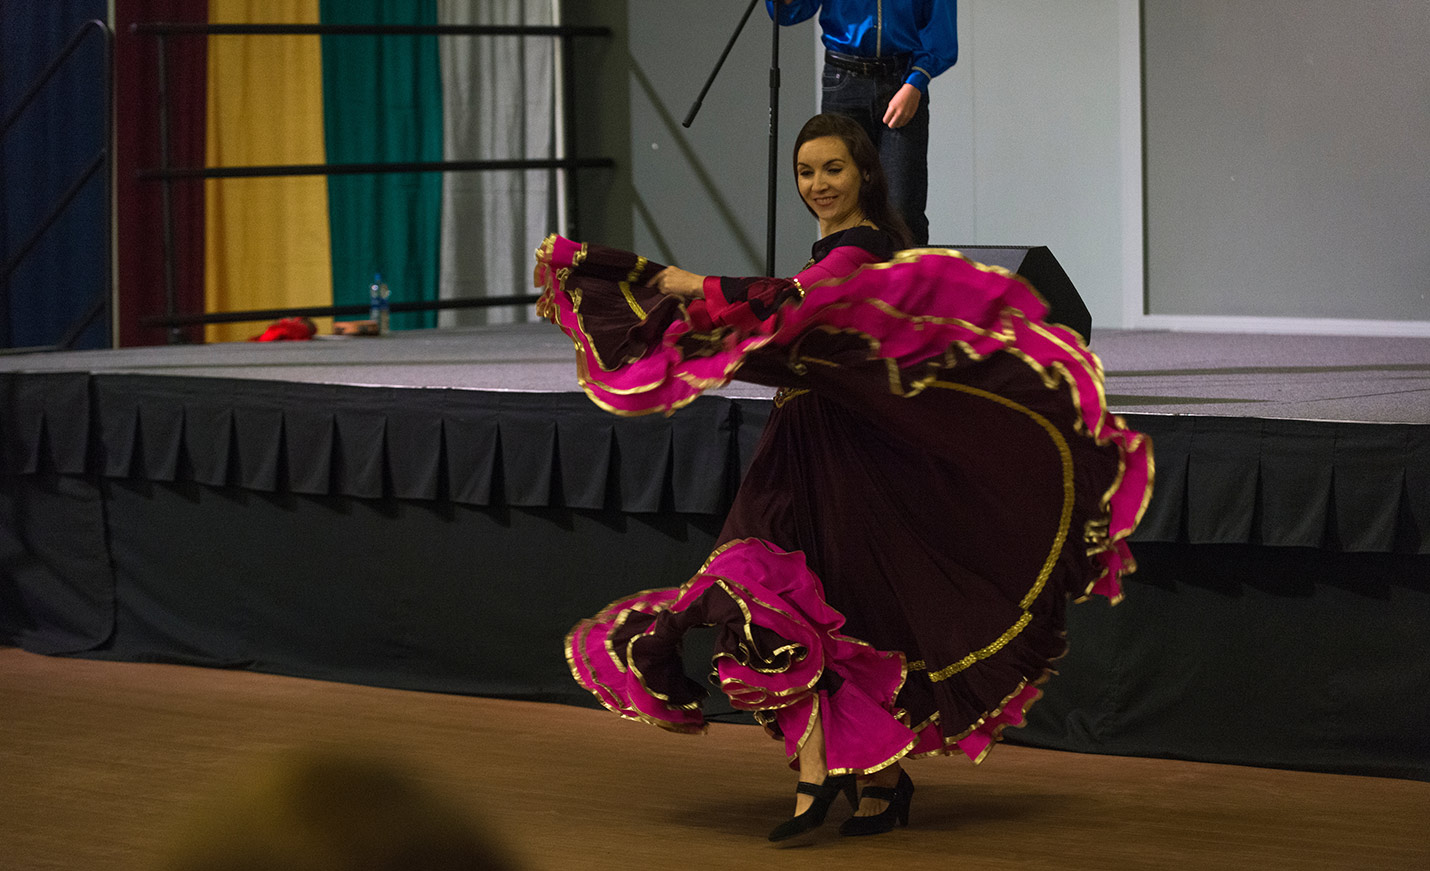 A dancer in a colorful black, fuchsia and yellow dress twirls as the dress billows out